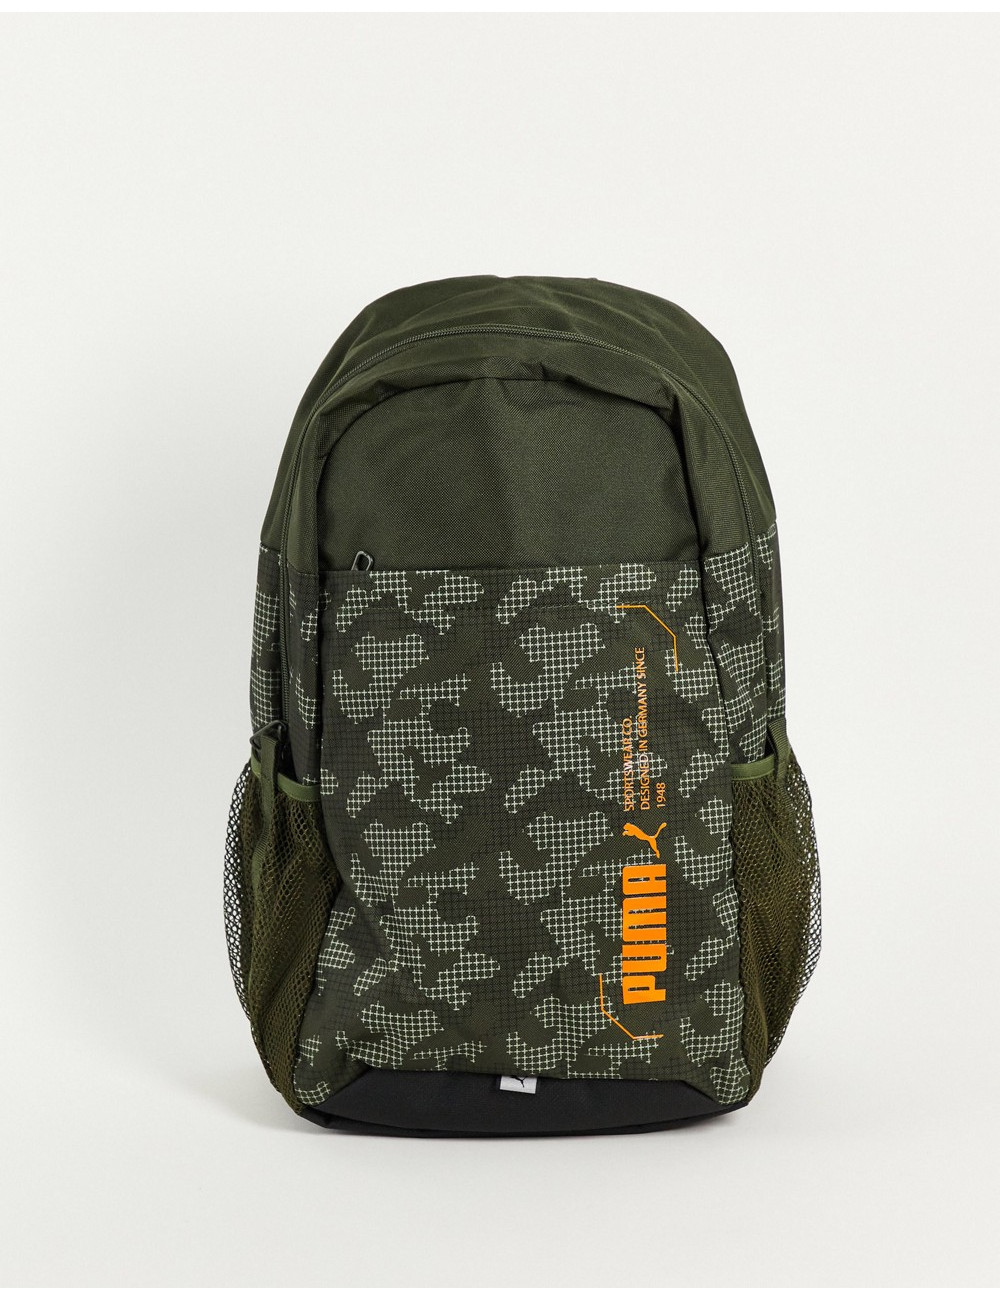 Puma Style backpack in green